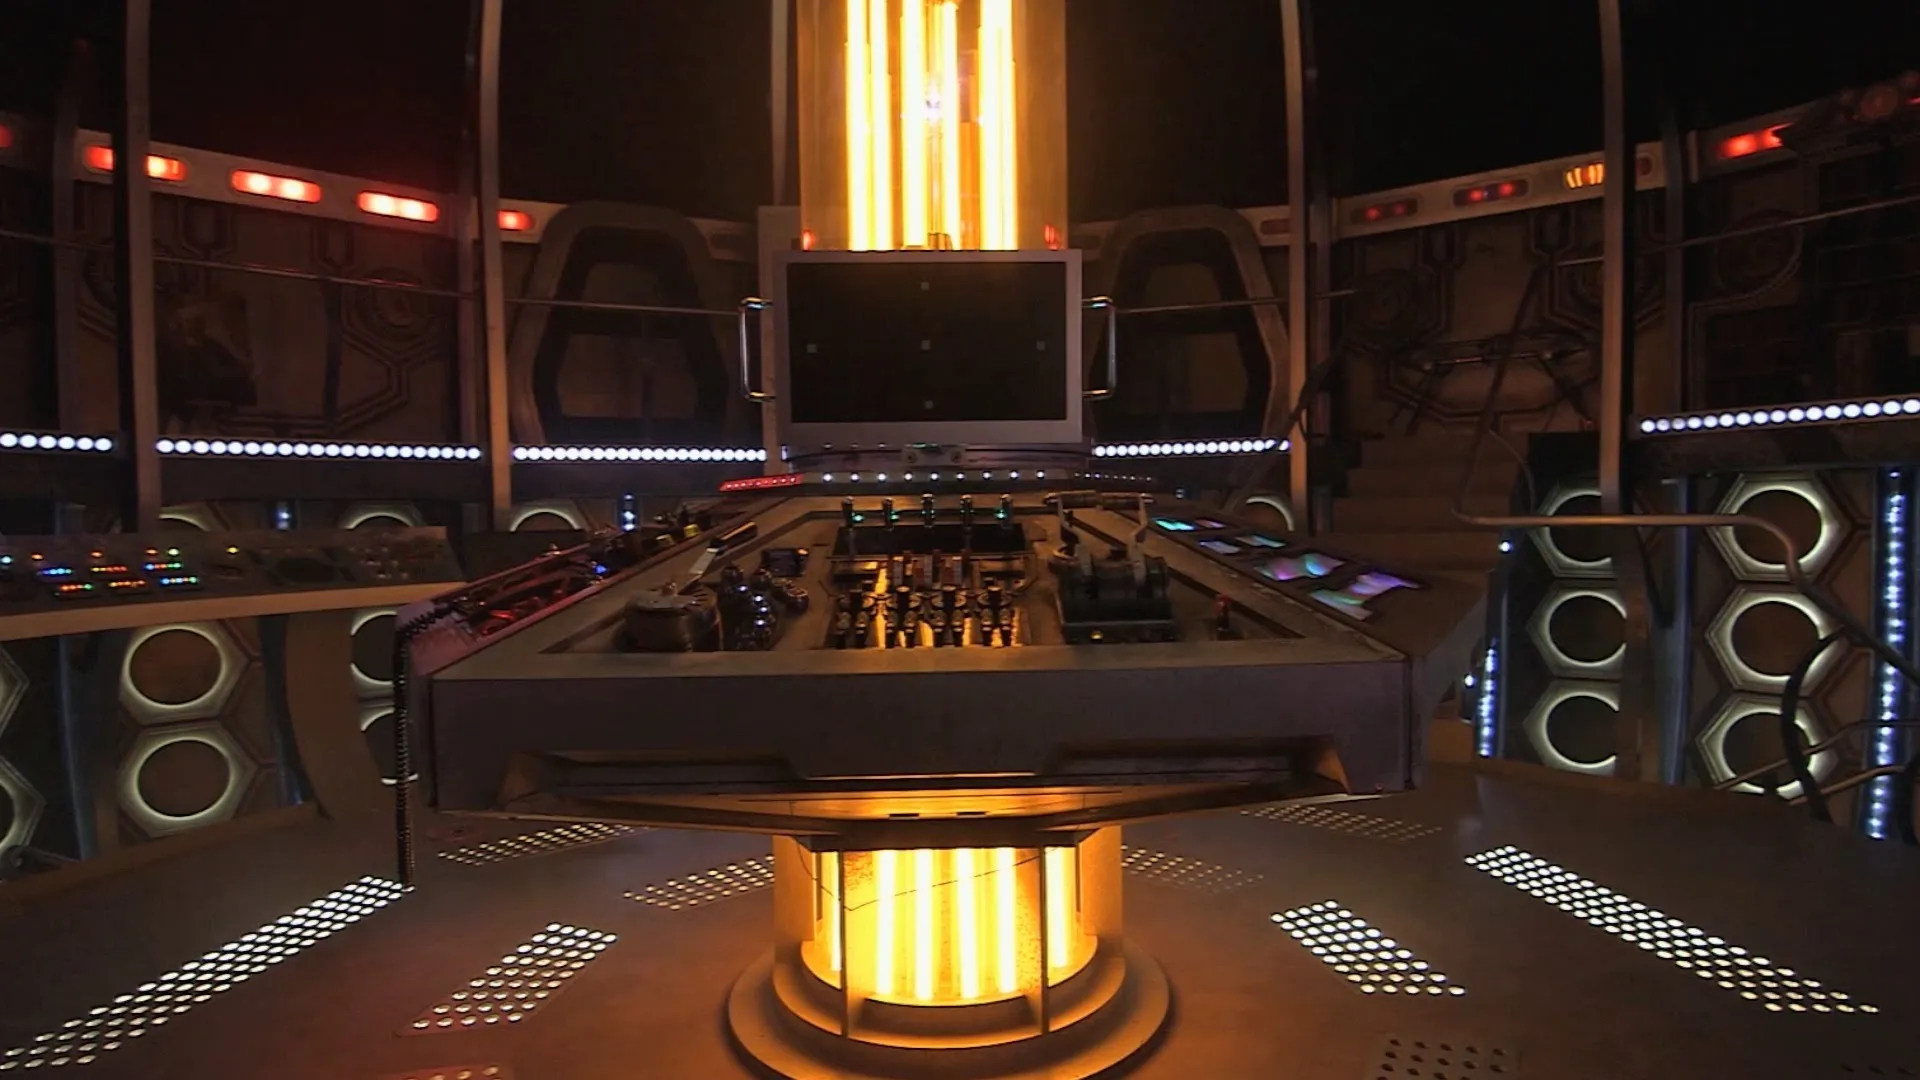 1920x1080 TARDIS Set Tours \u0026 More at the Doctor Who Experience This Easter Blogtor Wh